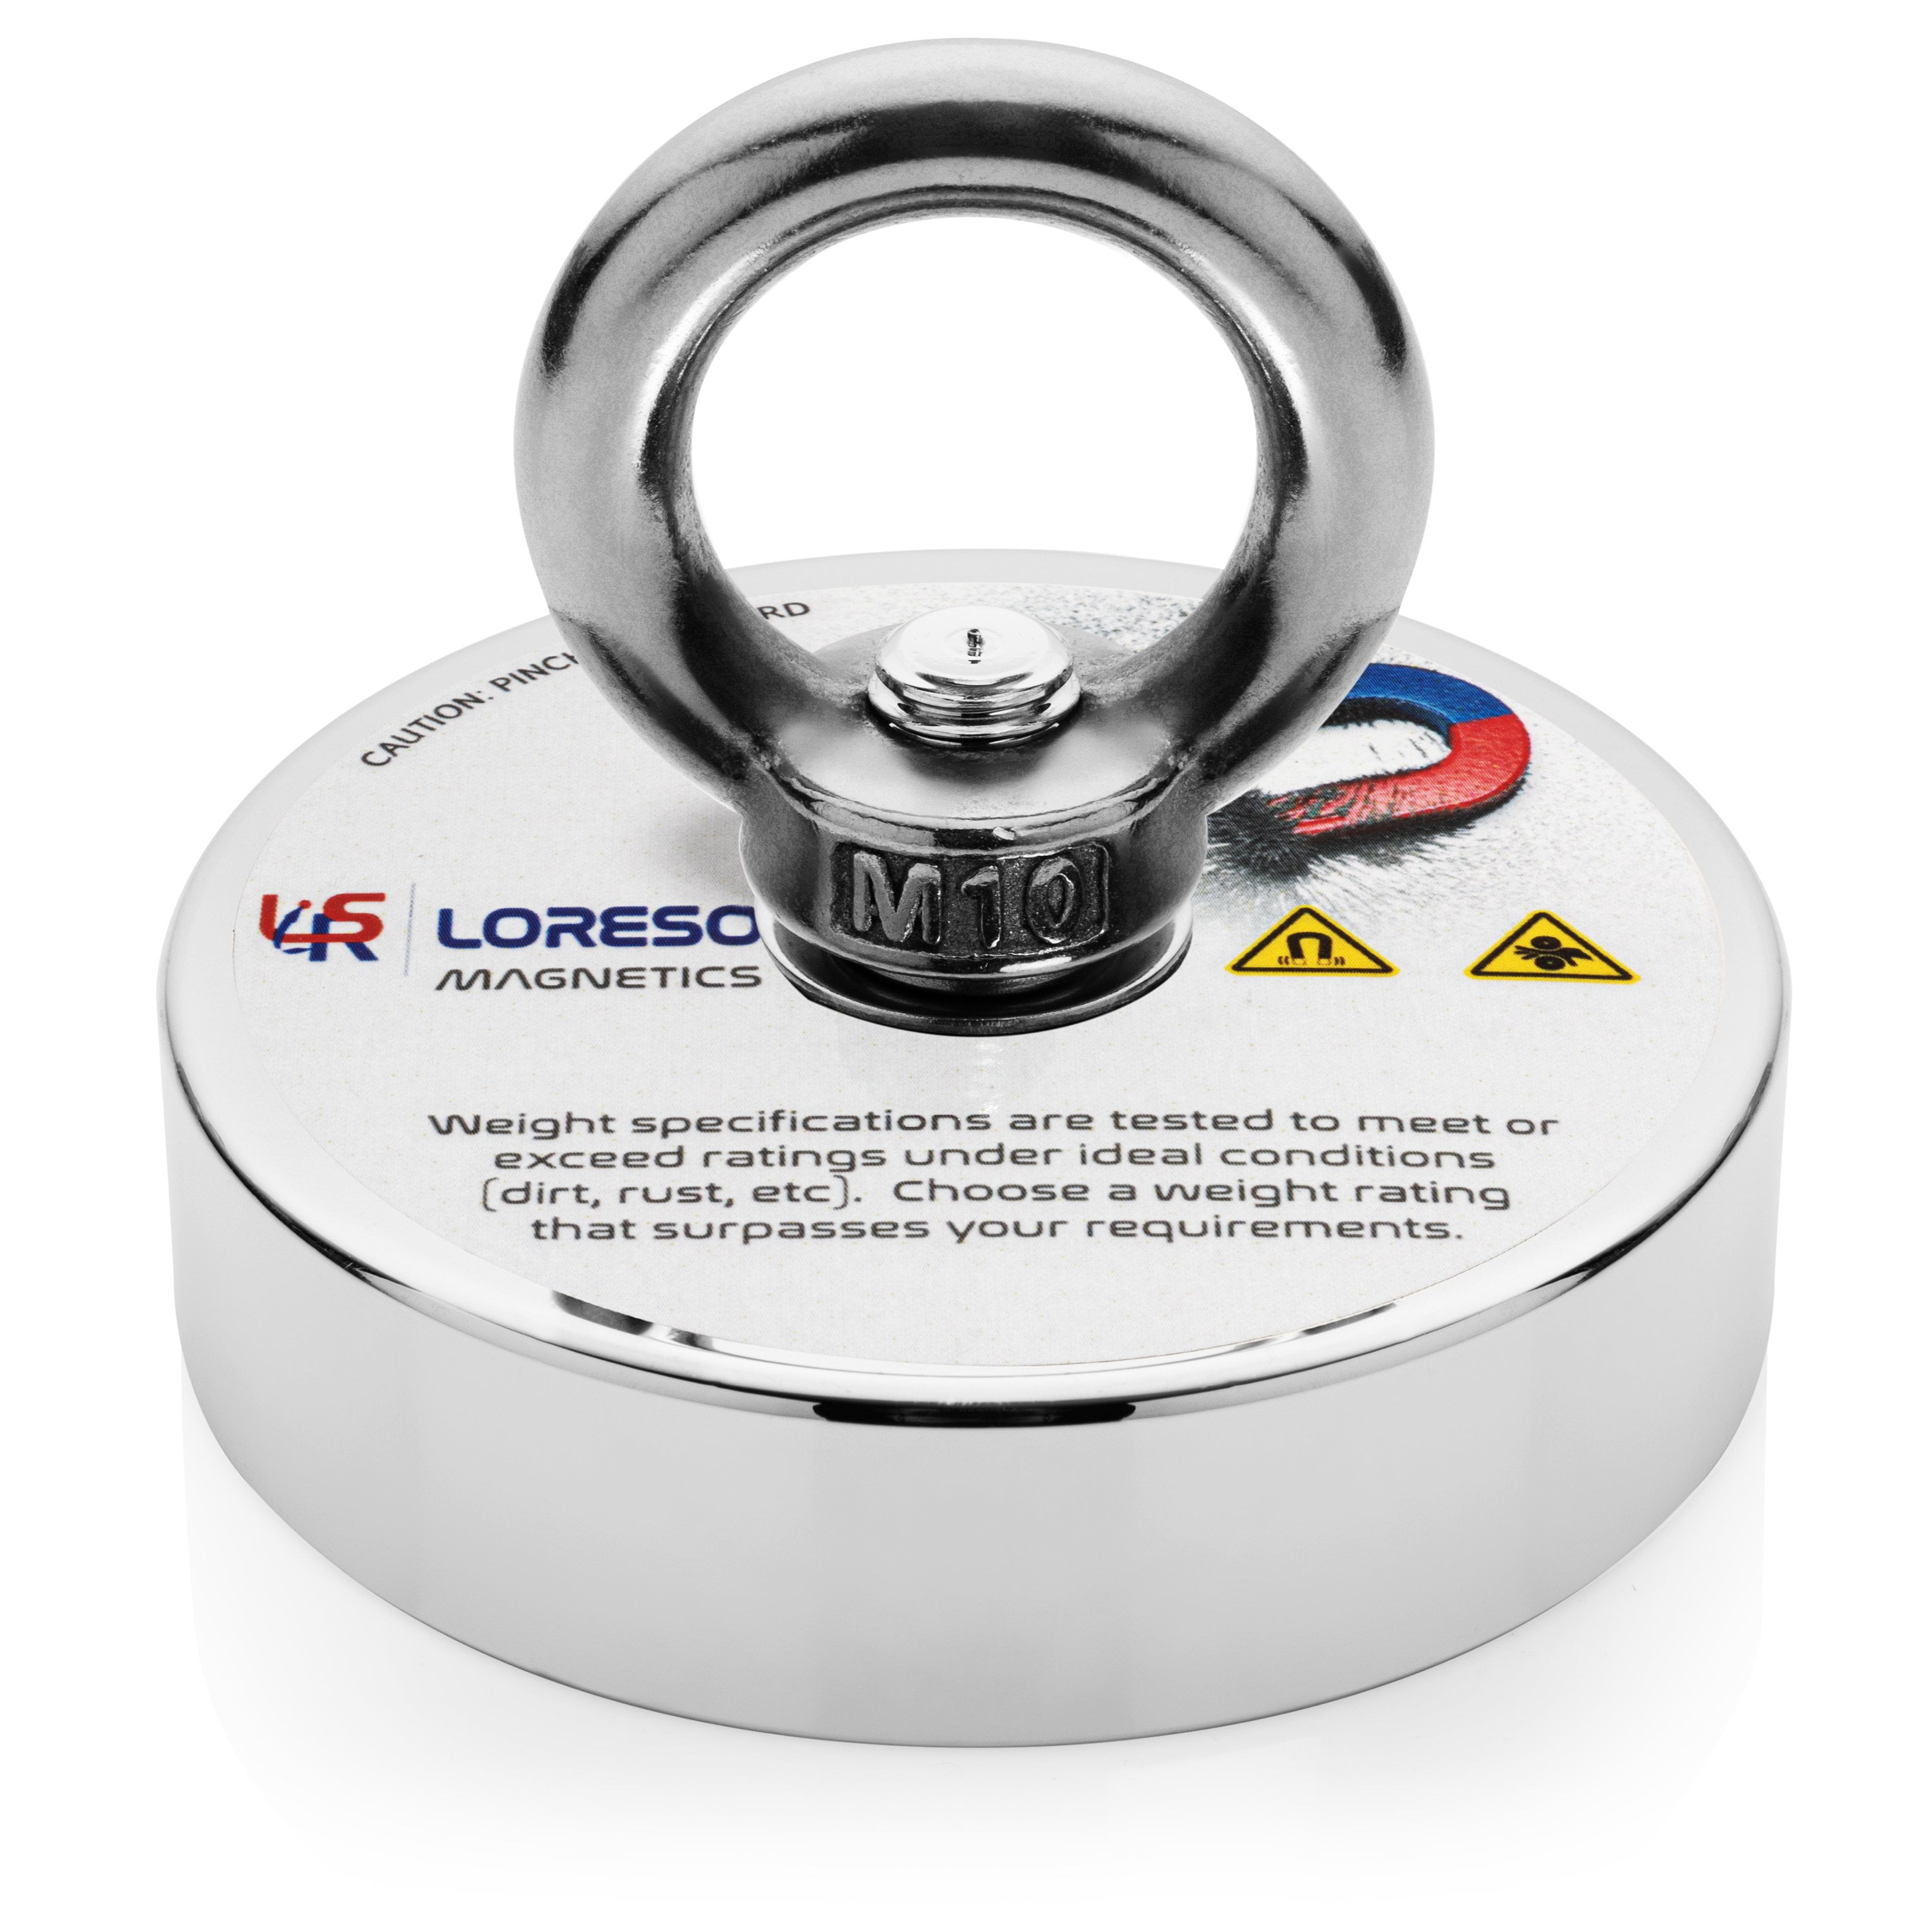 Loreso Fishing Magnet 550lb - Strong Neodymium Salvage Magnet with Eyebolt,  Powerful Rare Earth Magnet for Magnet Fishing with a Magnetic Pulling Force  of 550 Pounds ( 250 KG ) 